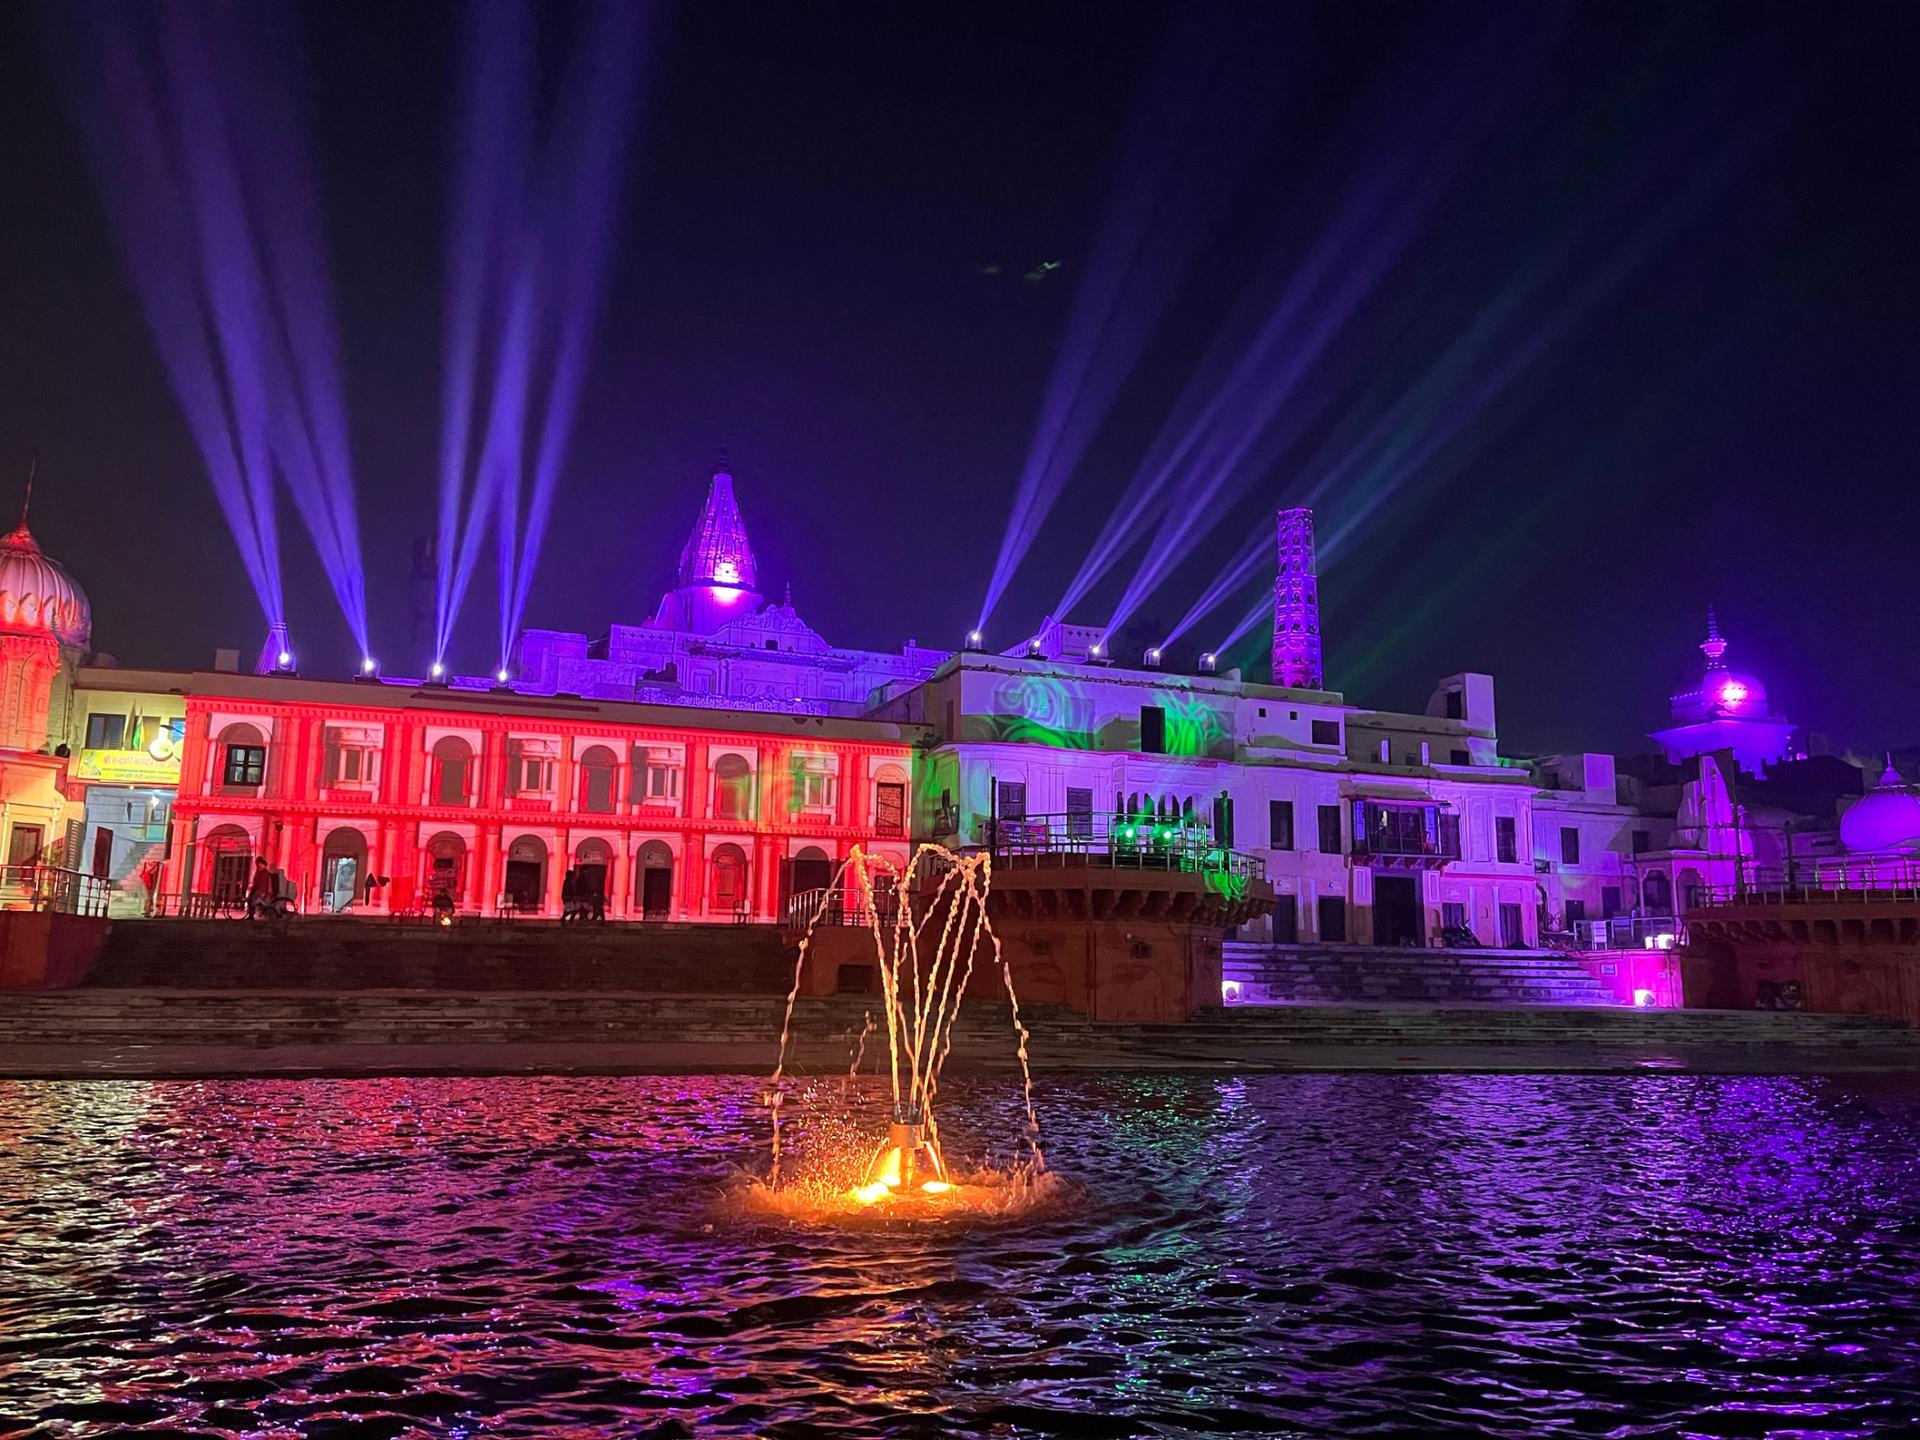  Multicolor laser beams light up the night sky on the banks of the Saryu river in Ayodhya. The town is gearing up to welcome huge crowds of pilgrims seeking blessings at its newest Hindu temple.